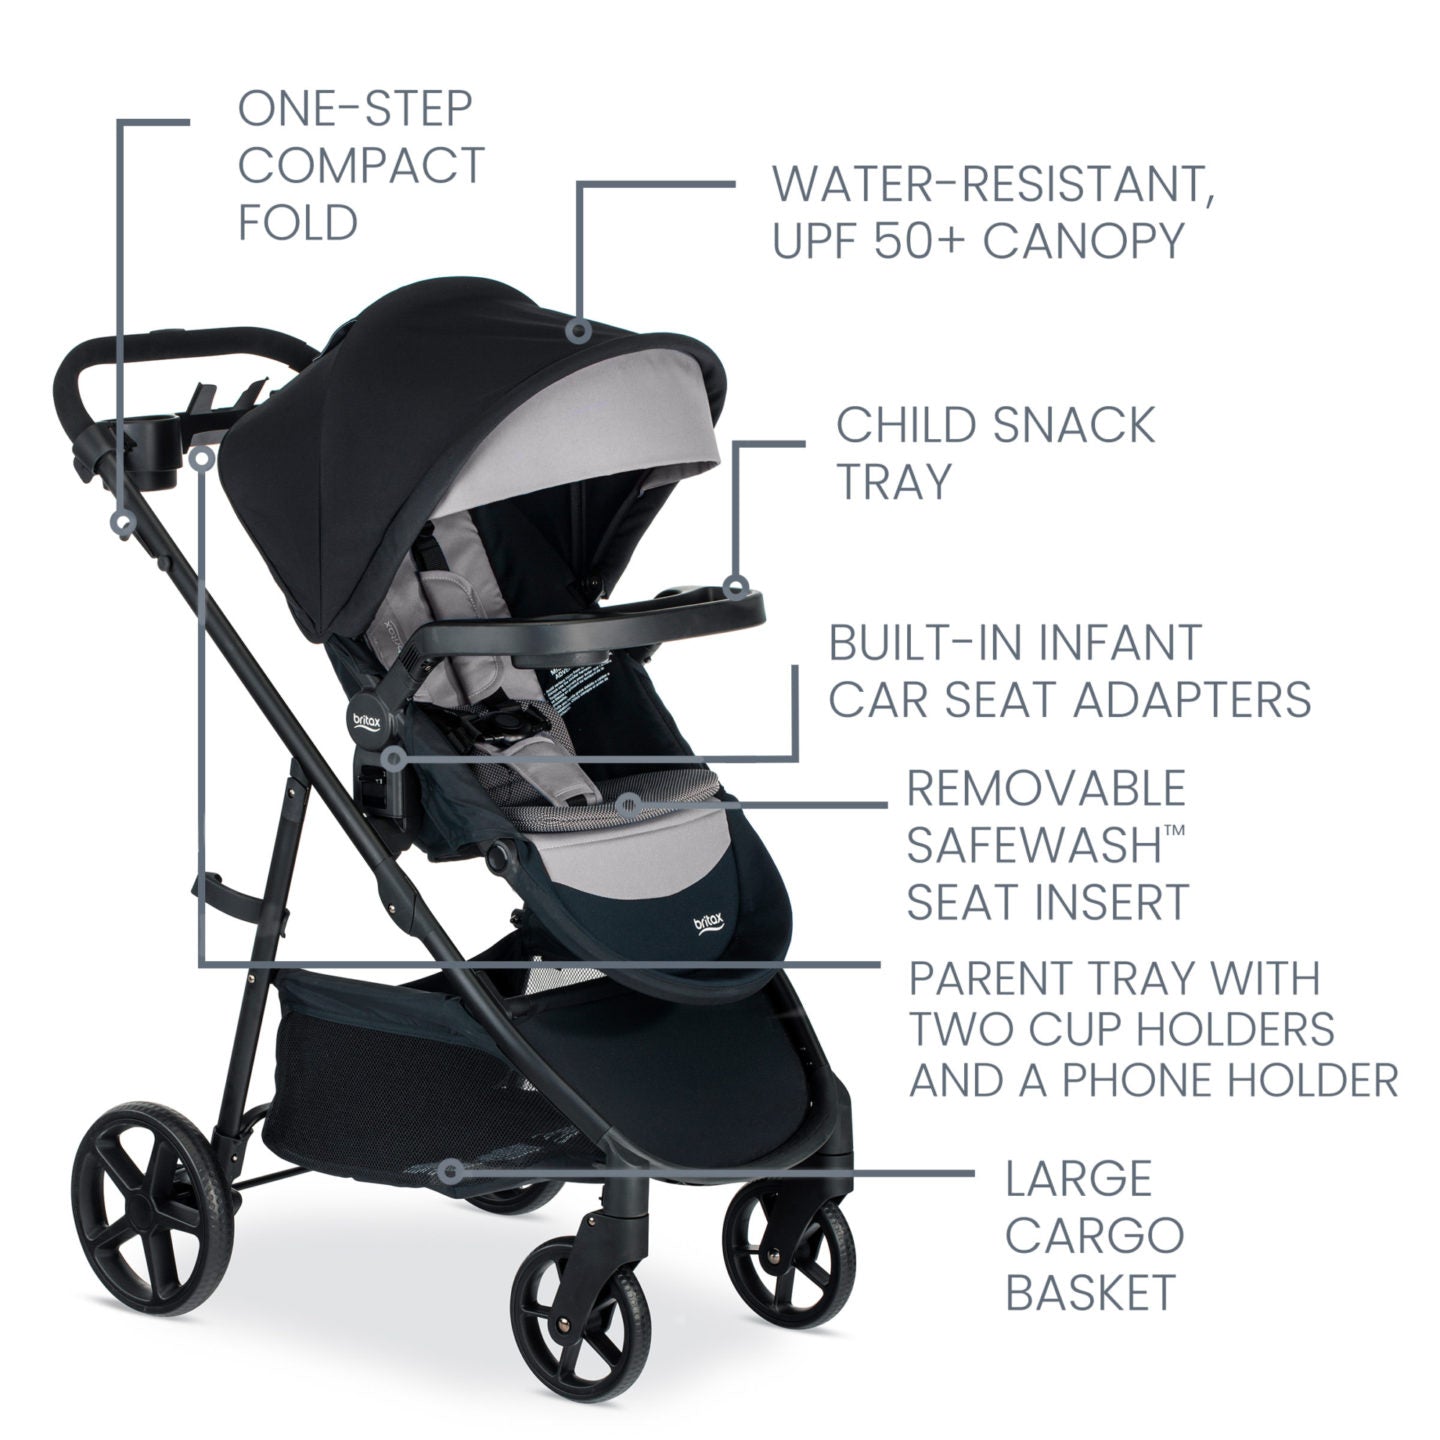 Britax Willow Brook S+ Travel System Features - Graphite Onyx